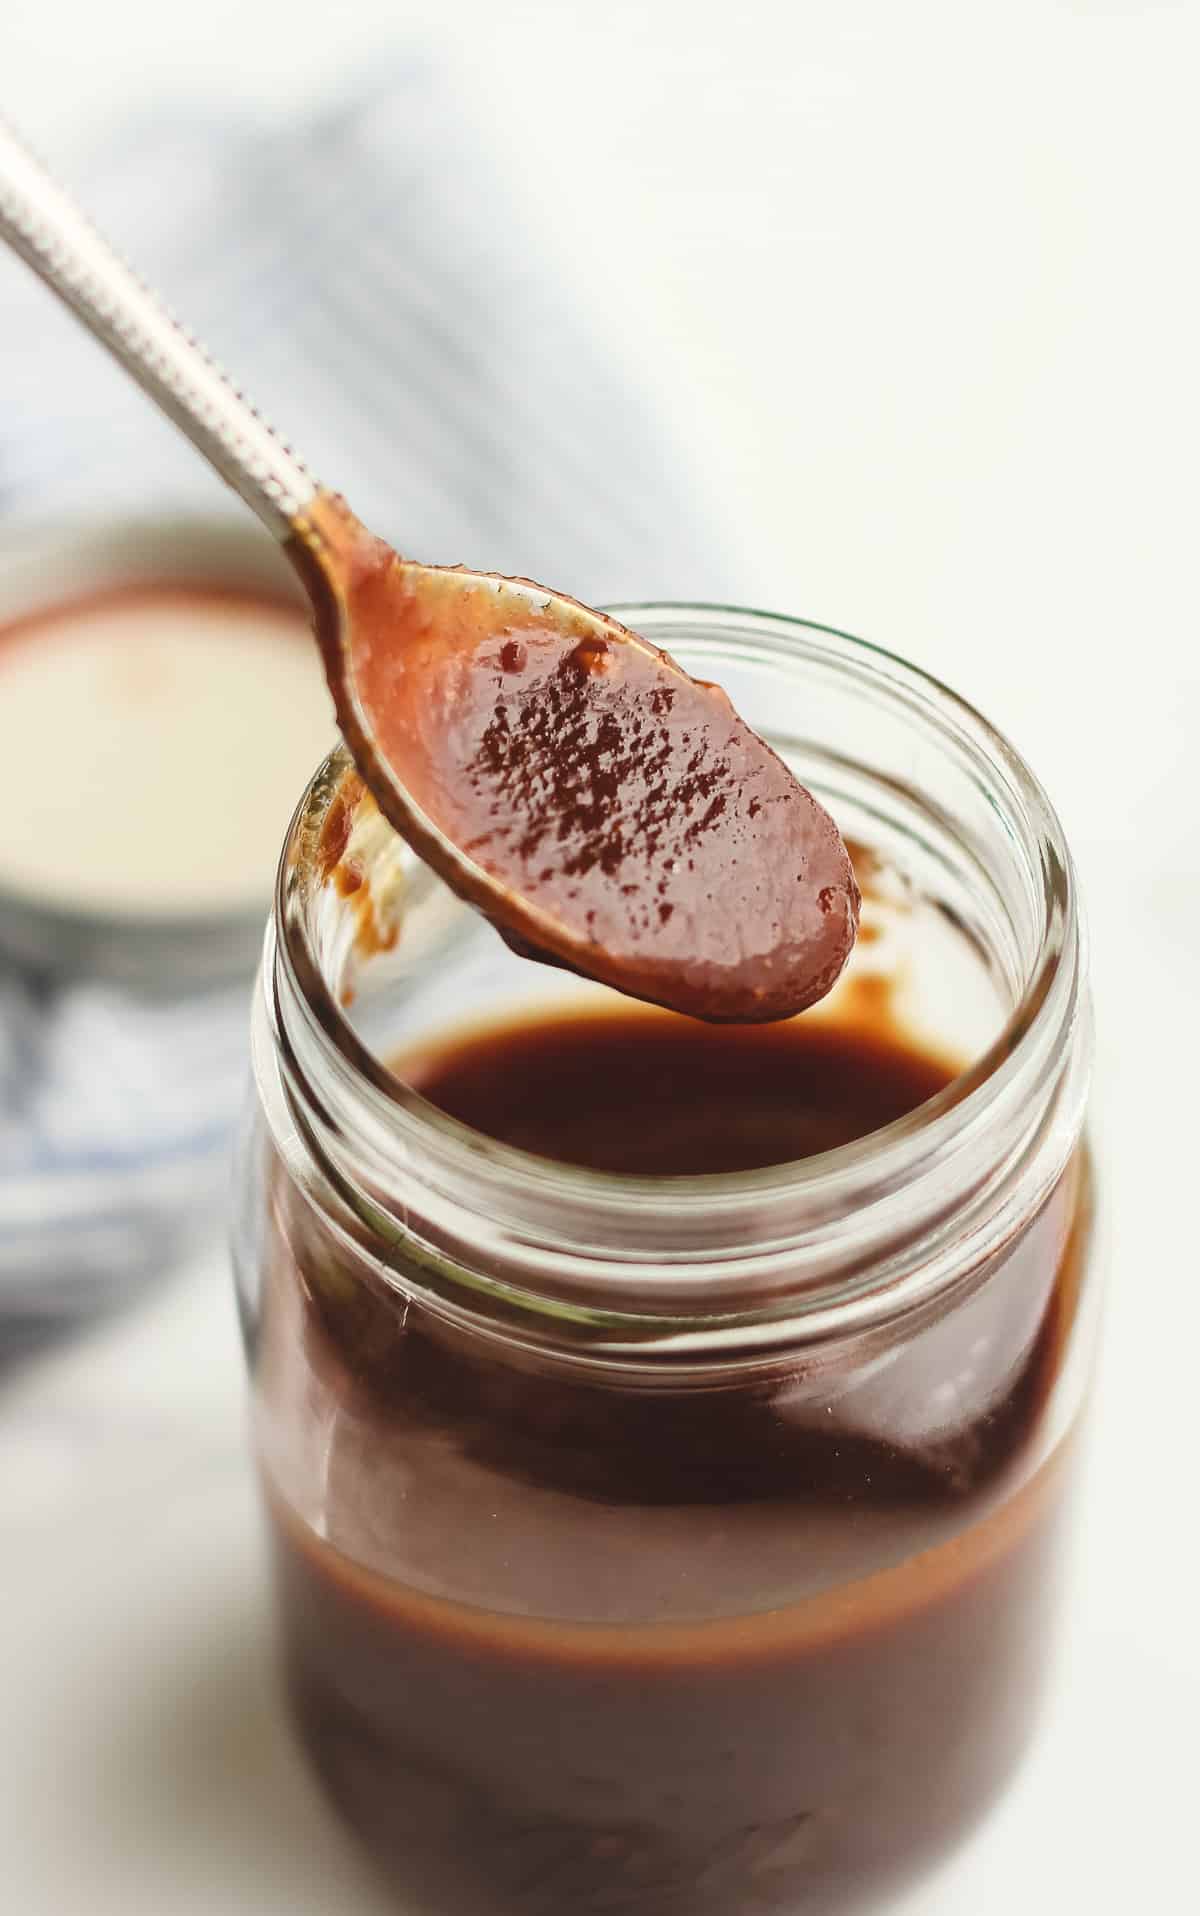 A spoonful dripping some barbecue sauce.